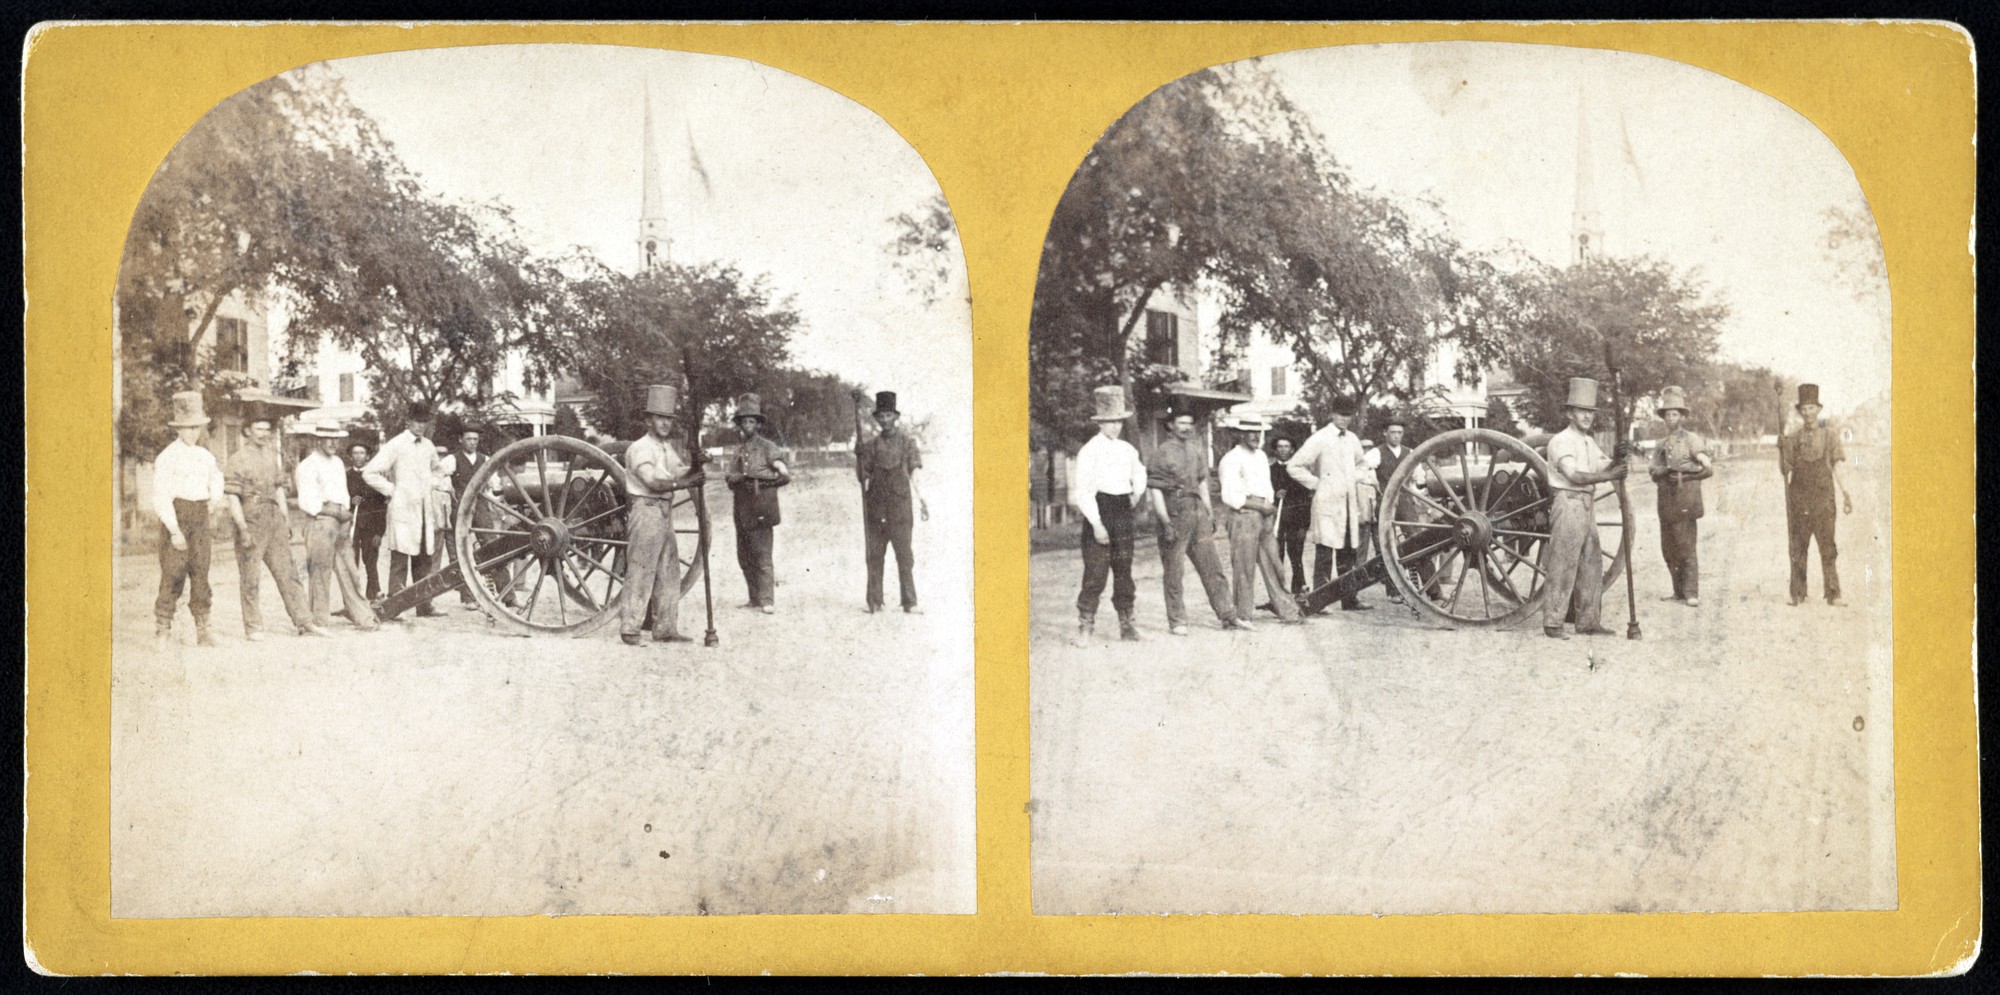 Southern artillery militia members in Charleston, S.C., are seen in a photo made between 1861 and 1865.